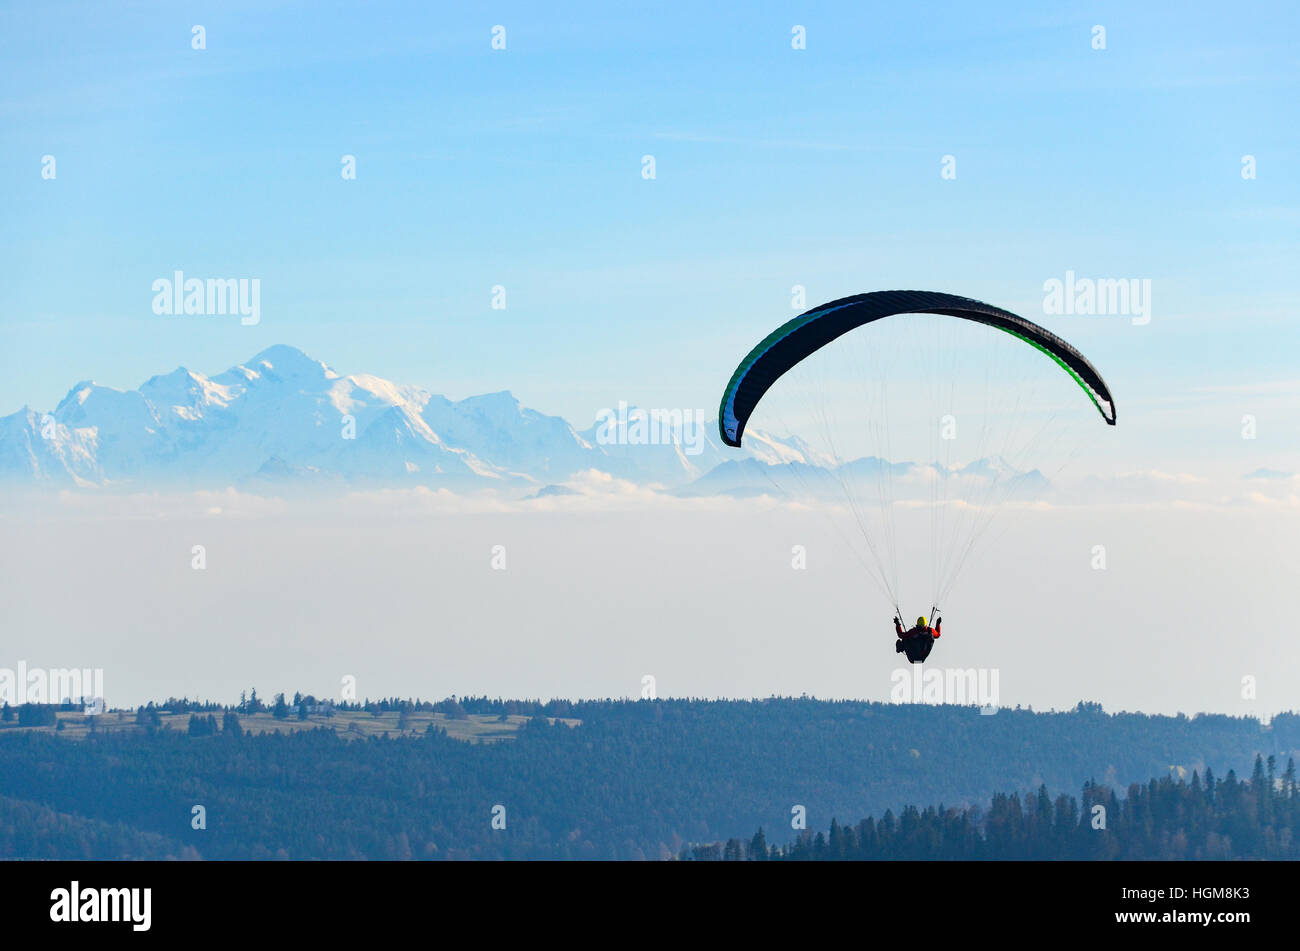 Paragliders flying over the Jura mountains with snowy Alps in the background Stock Photo